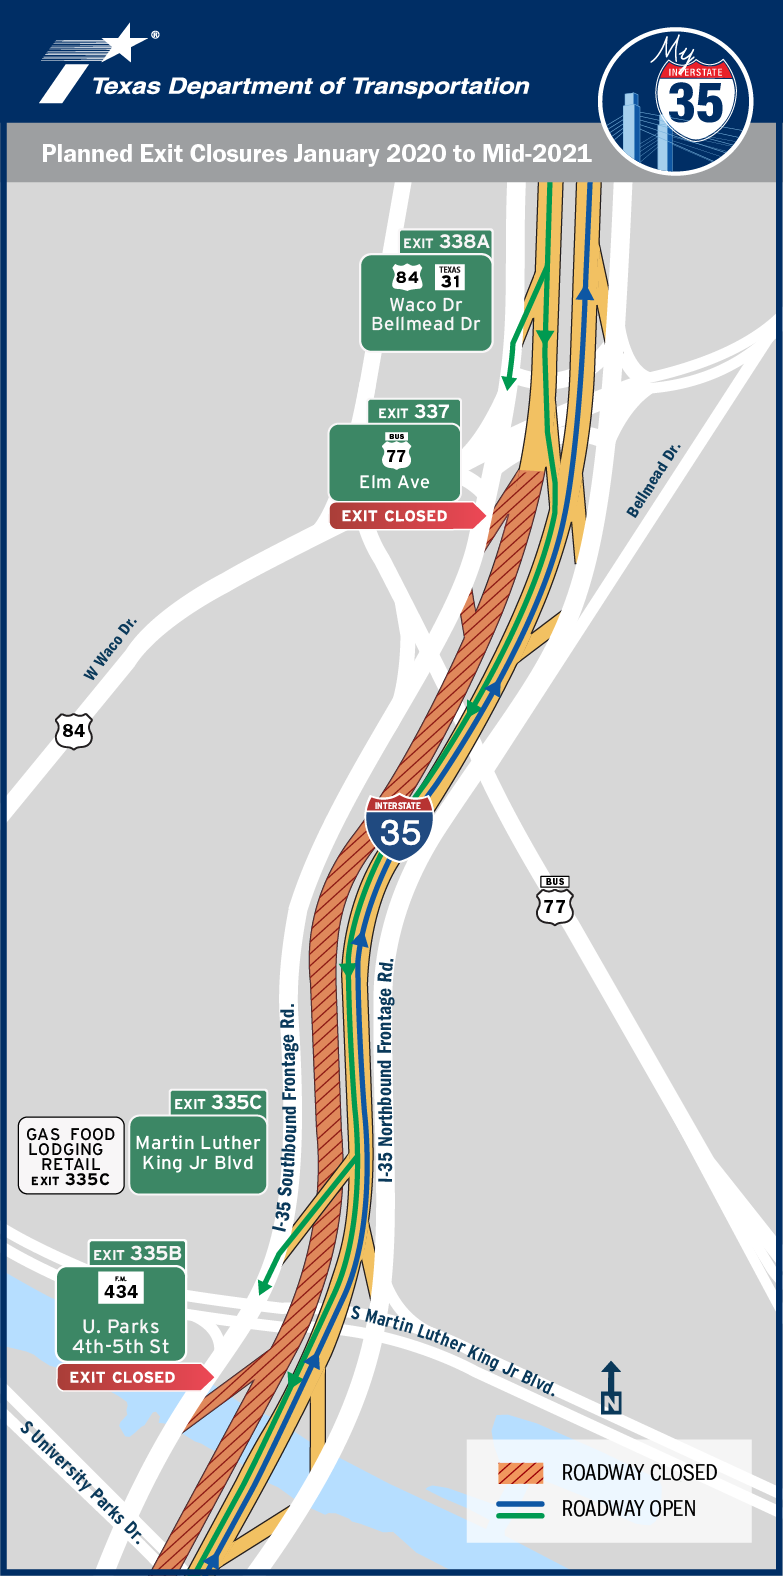 Map of changes to Interstate 35 from January 2020 to Mid 2021